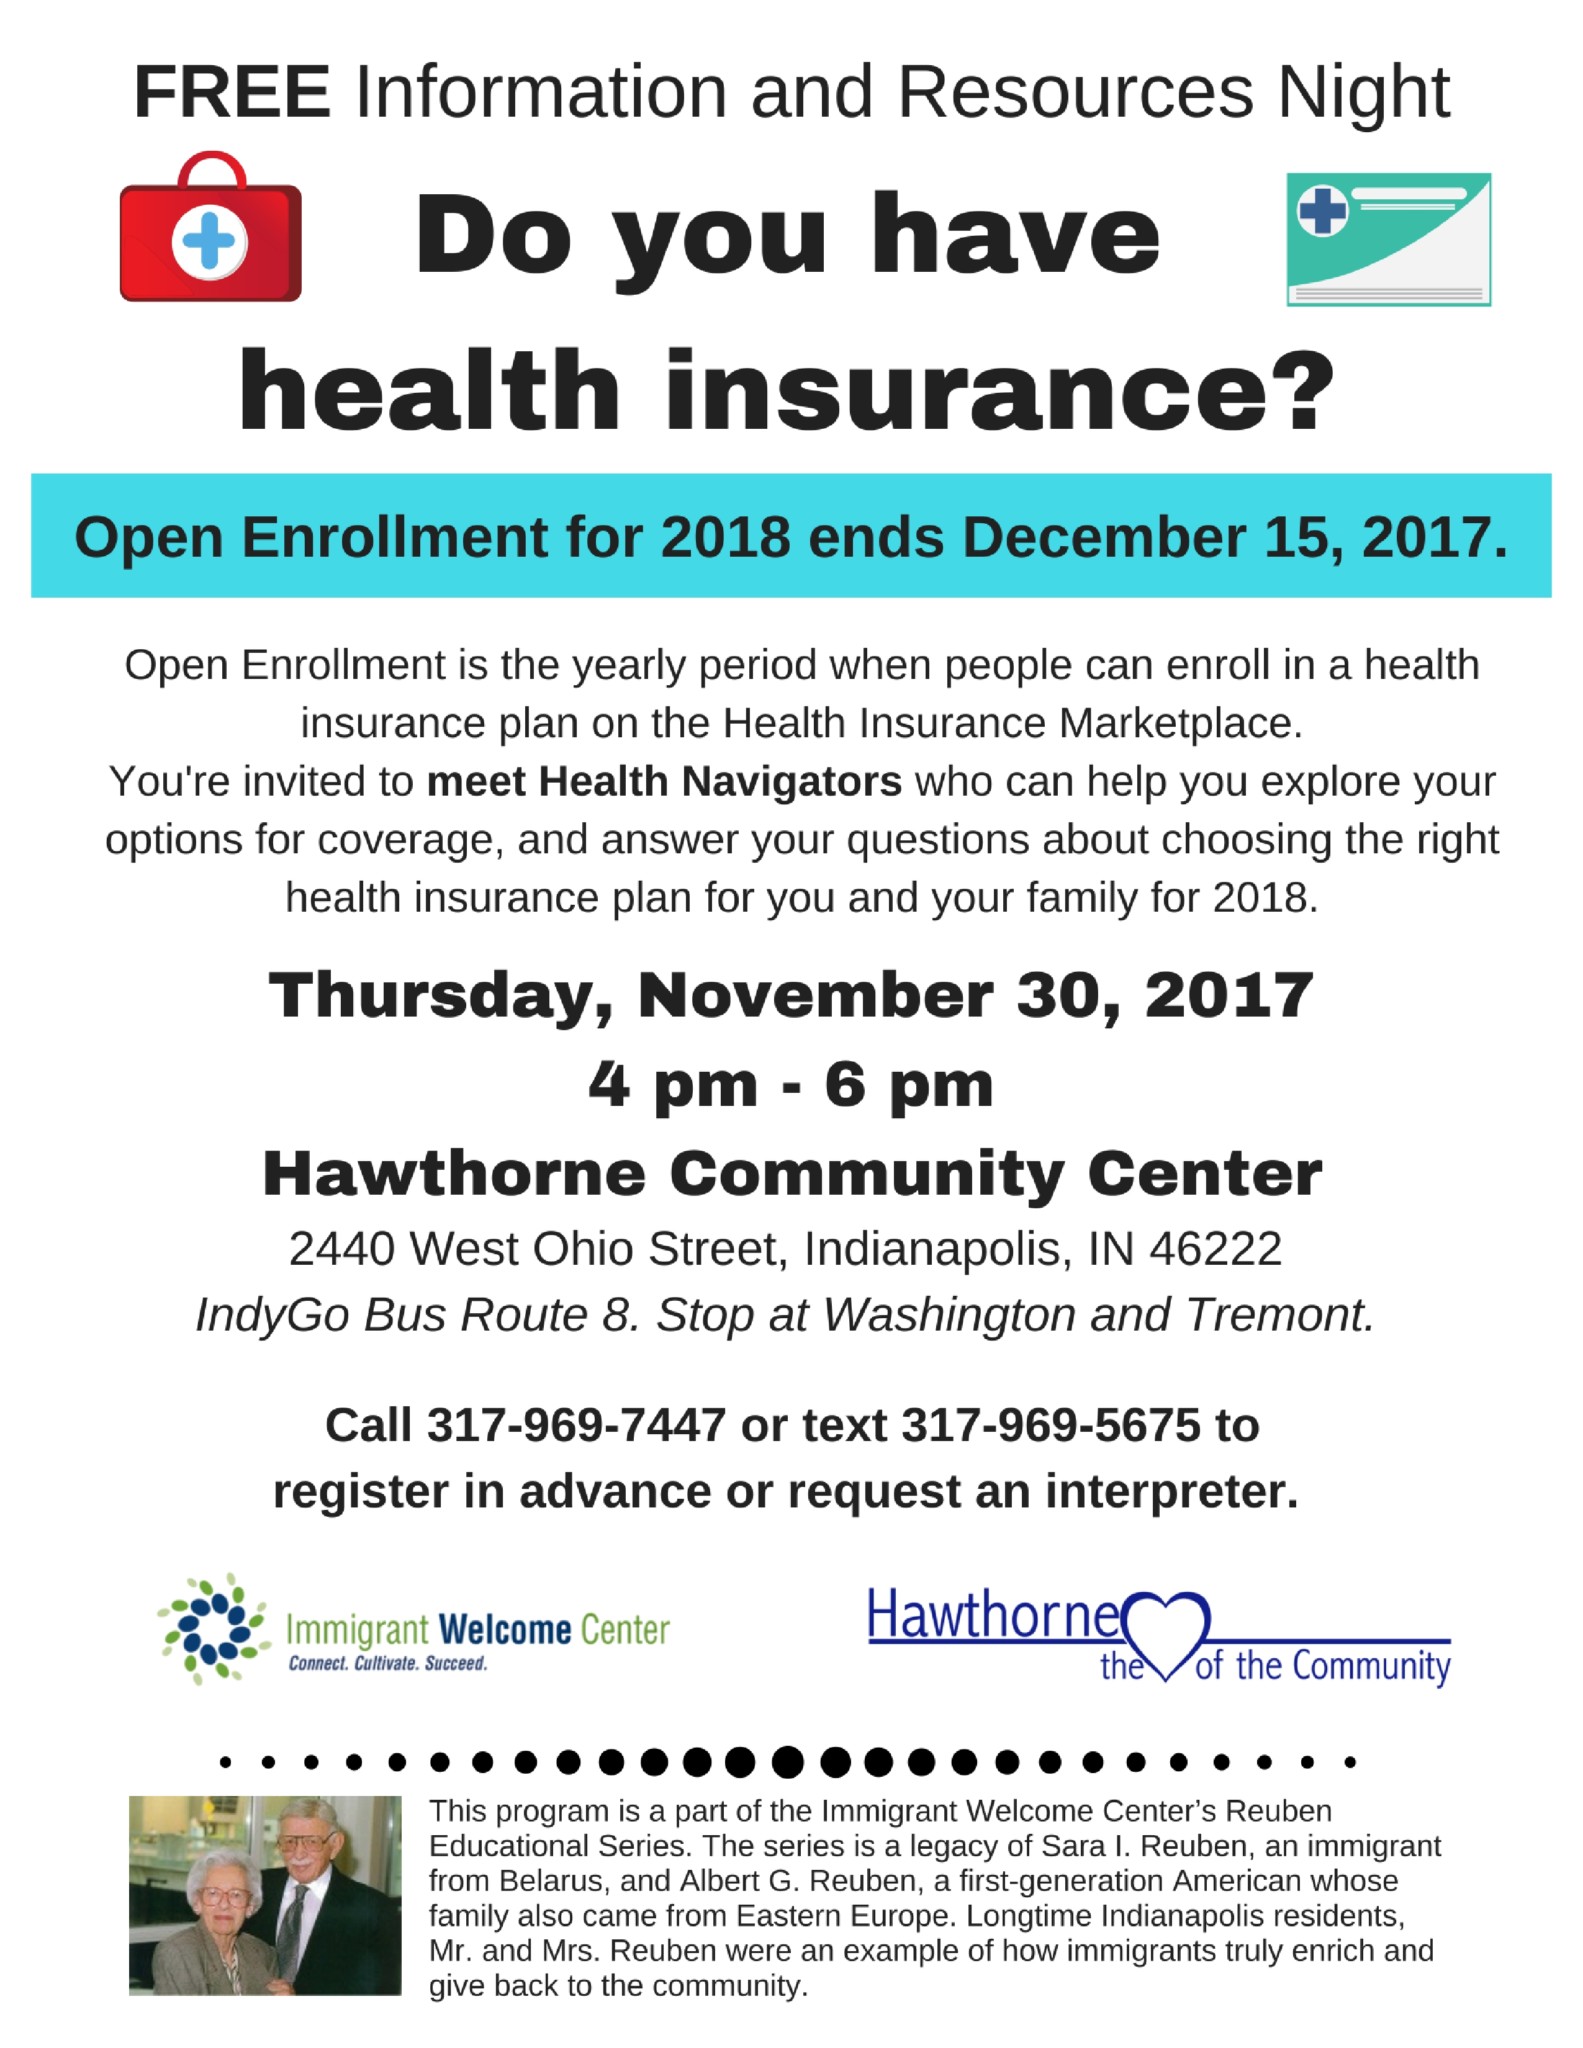 Health insurance can be confusing, so we have a free seminar coming up to help you understand your options.